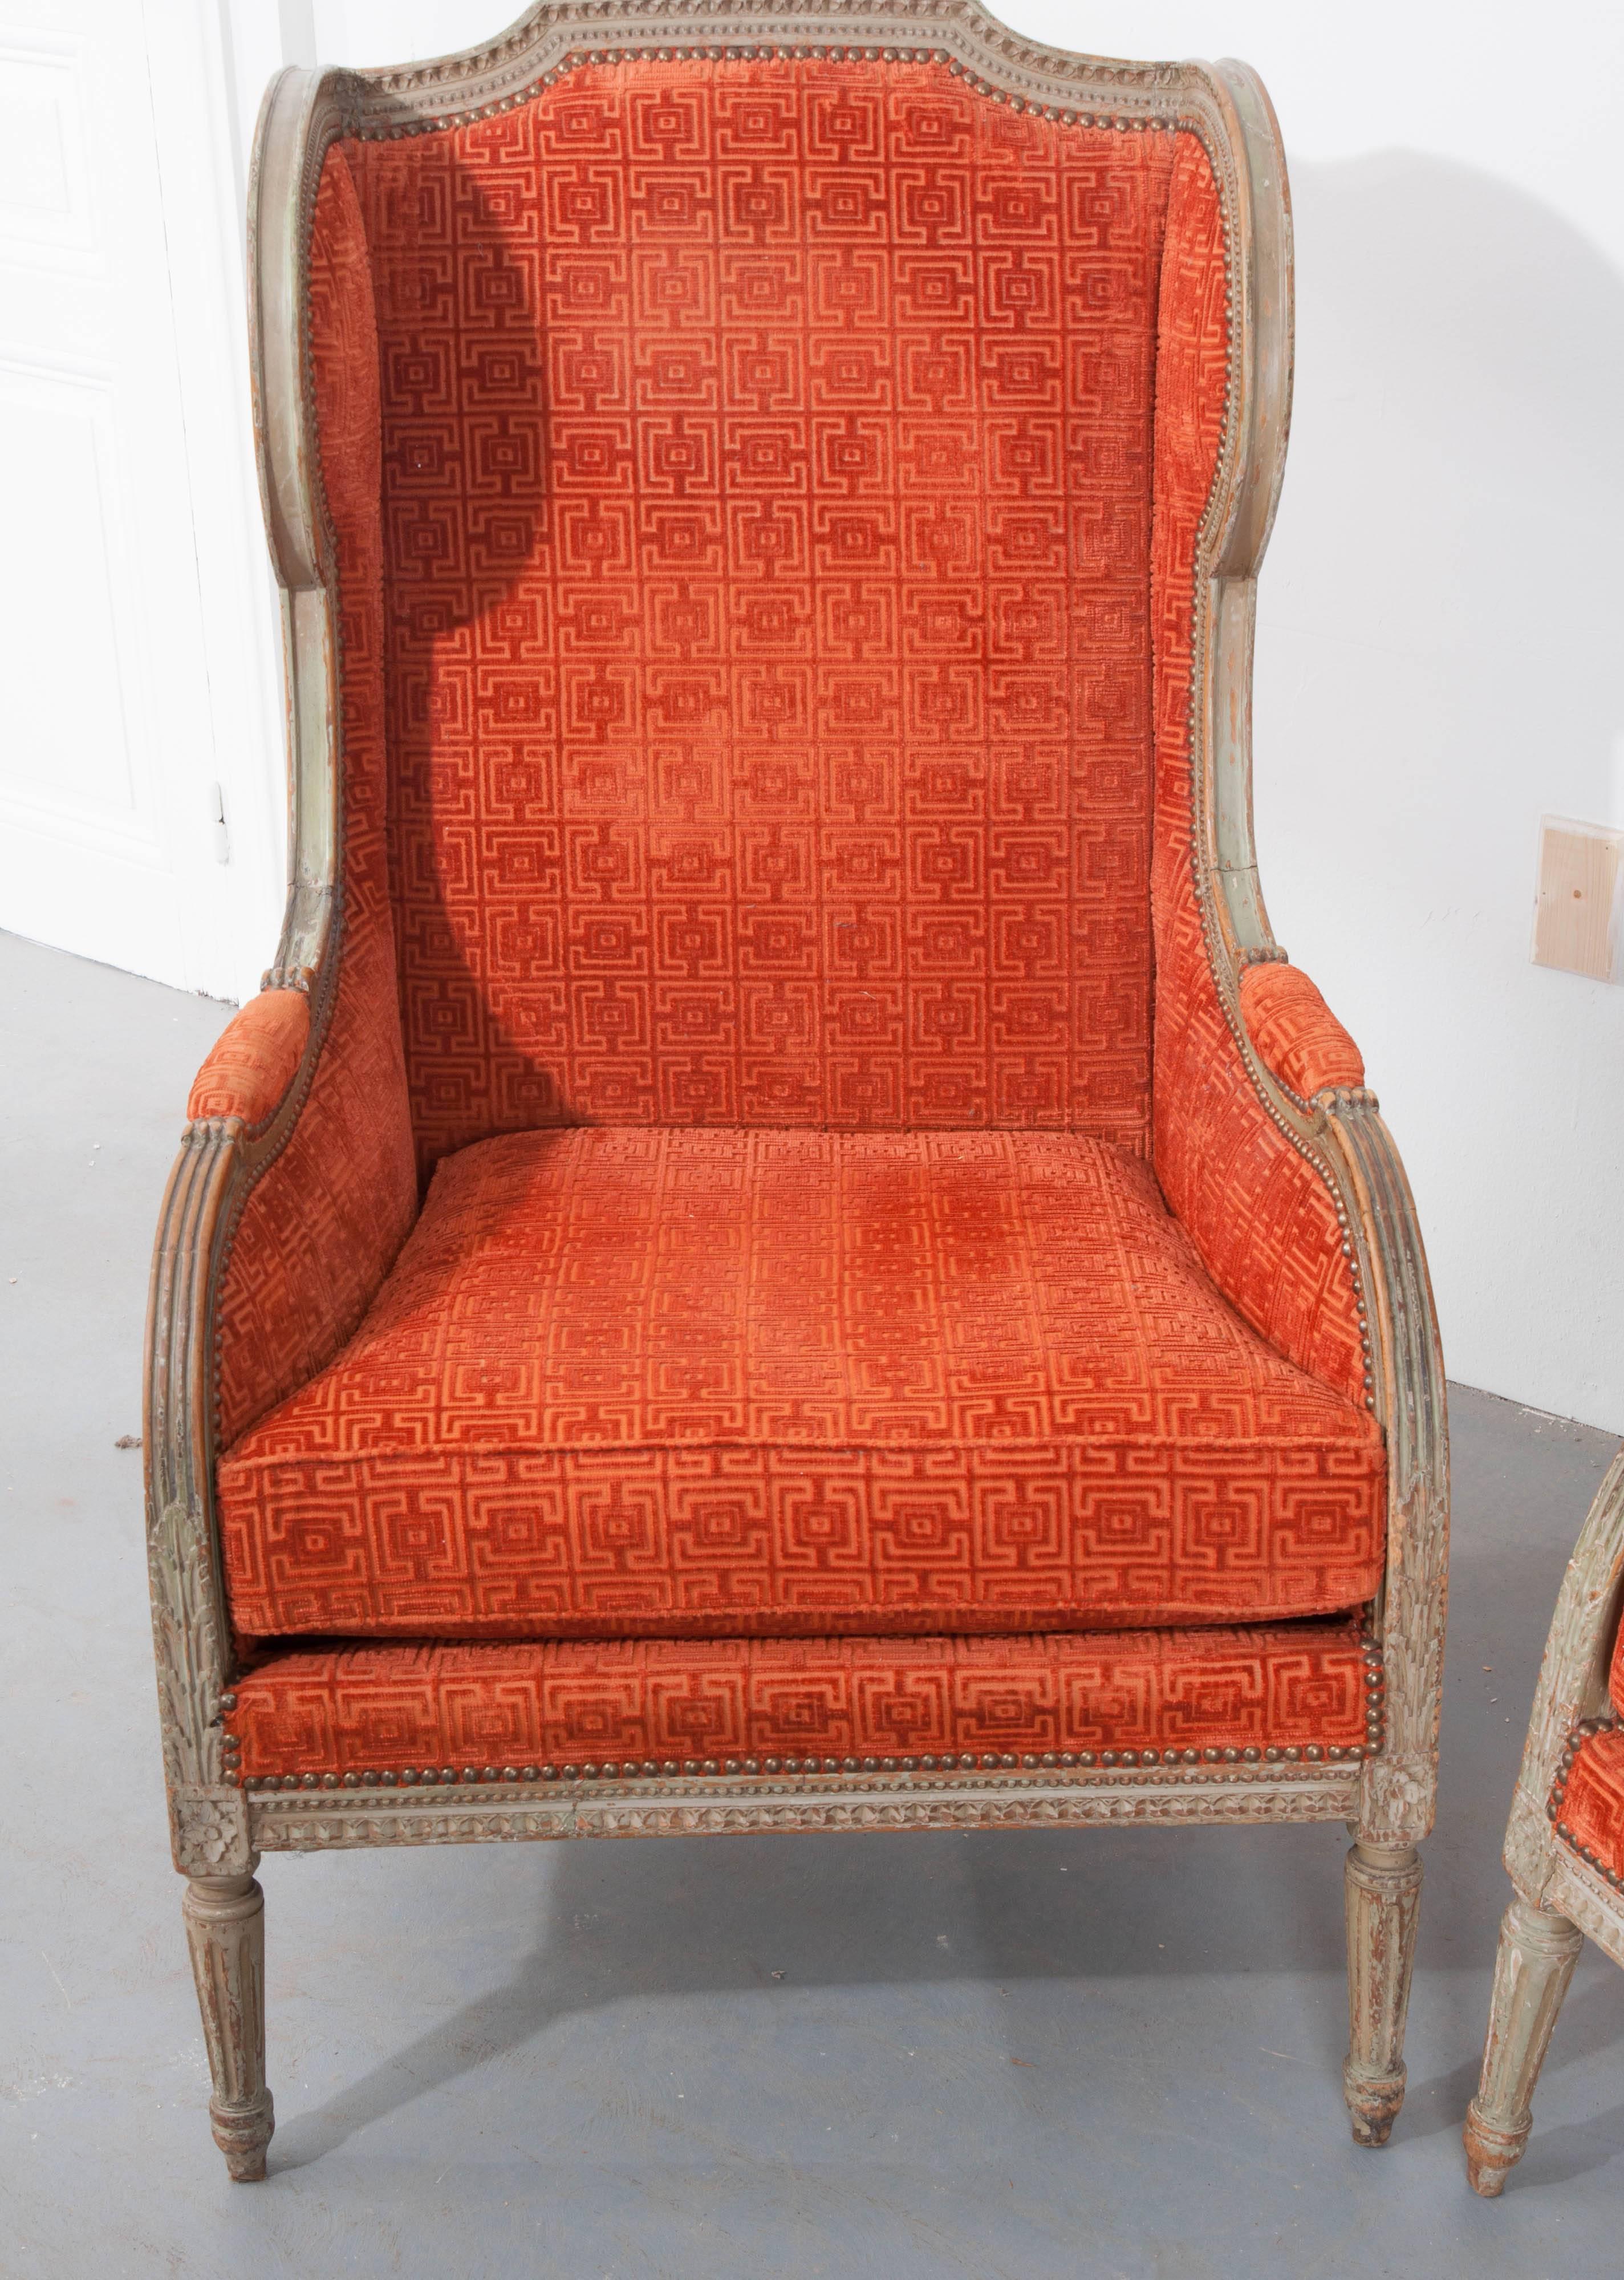 A fine pair of French Louis XVI bergères from the 19th century. The chairs are upholstered in a vivid flame persimmon colored cut velvet, with a geometric pattern, and affixed to the frame with nailheads. A remarkable aged patina has consumed the